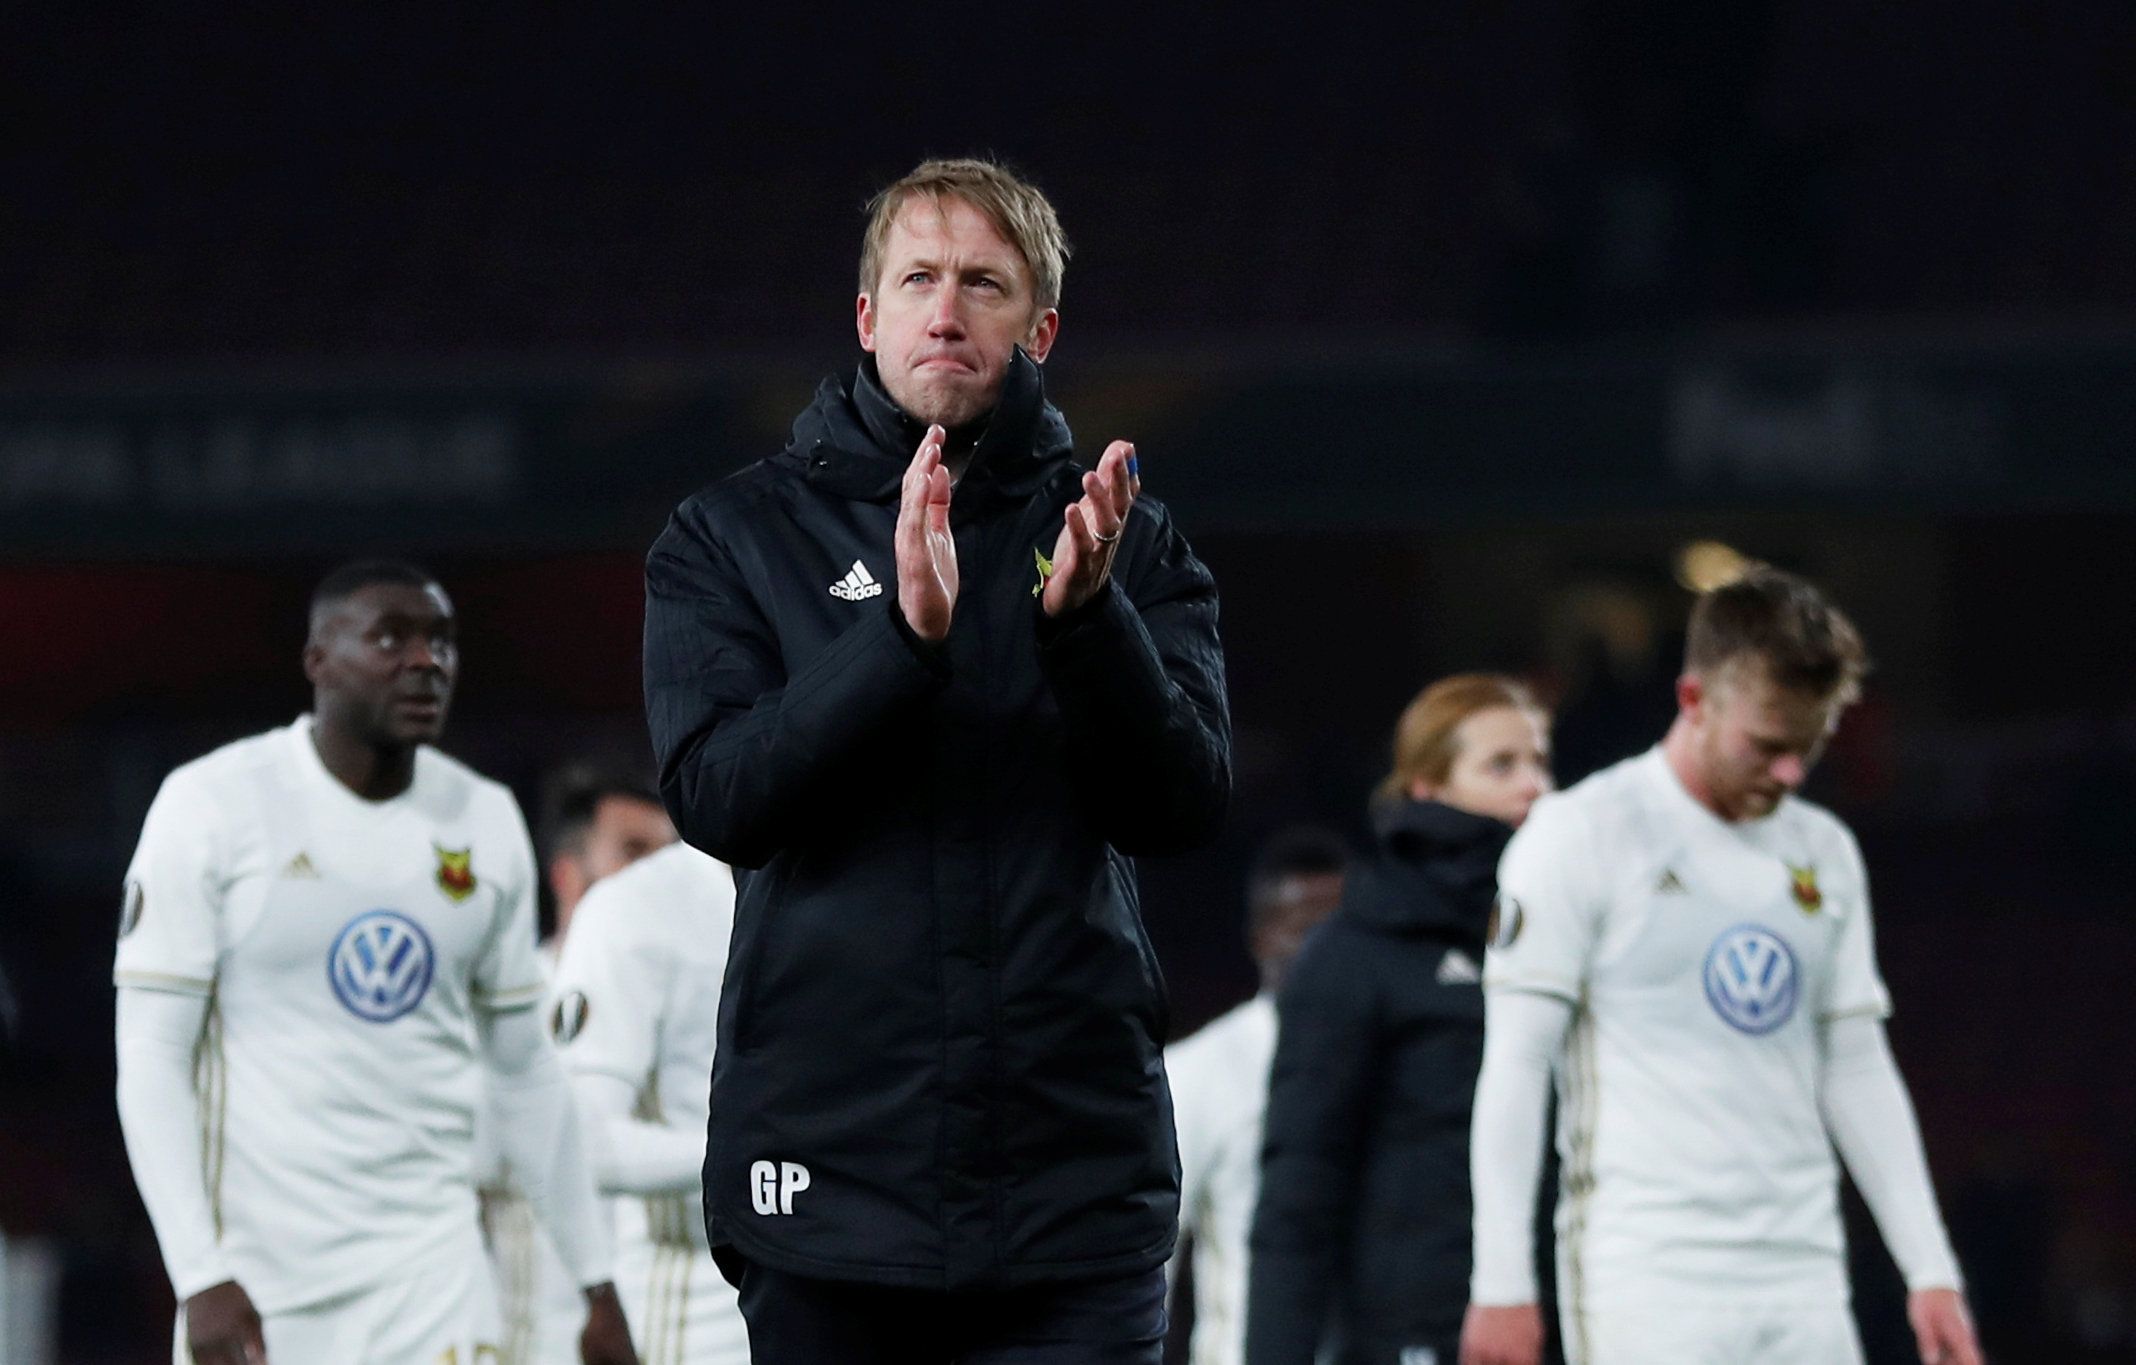 Soccer Football - Europa League Round of 32 Second Leg - Arsenal vs Ostersunds FK - Emirates Stadium, London, Britain - February 22, 2018   Ostersunds FK coach Graham Potter celebrates after the match     REUTERS/Eddie Keogh